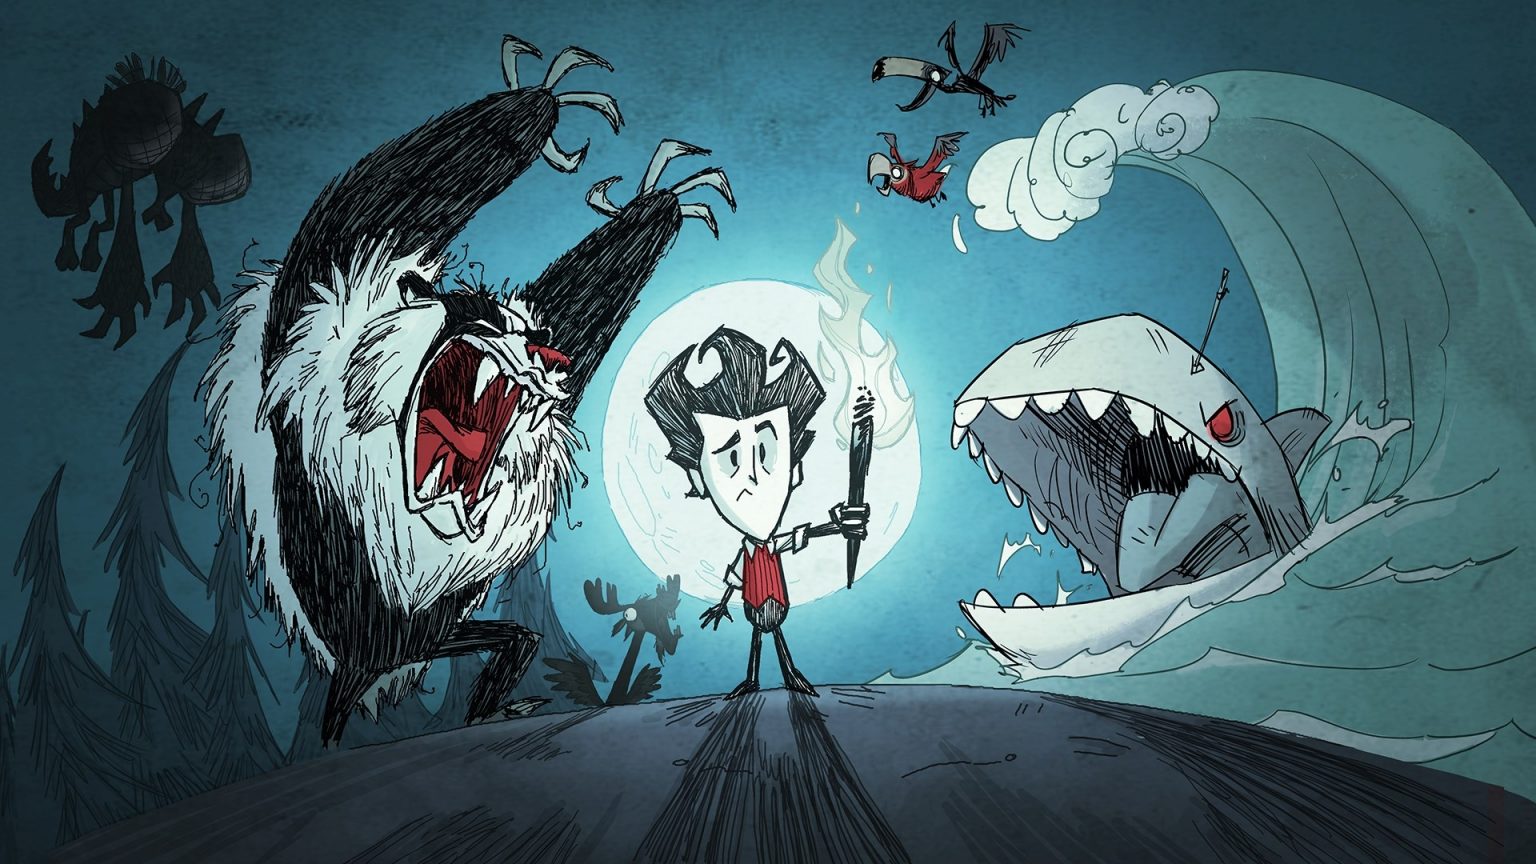 dont starve together switch character